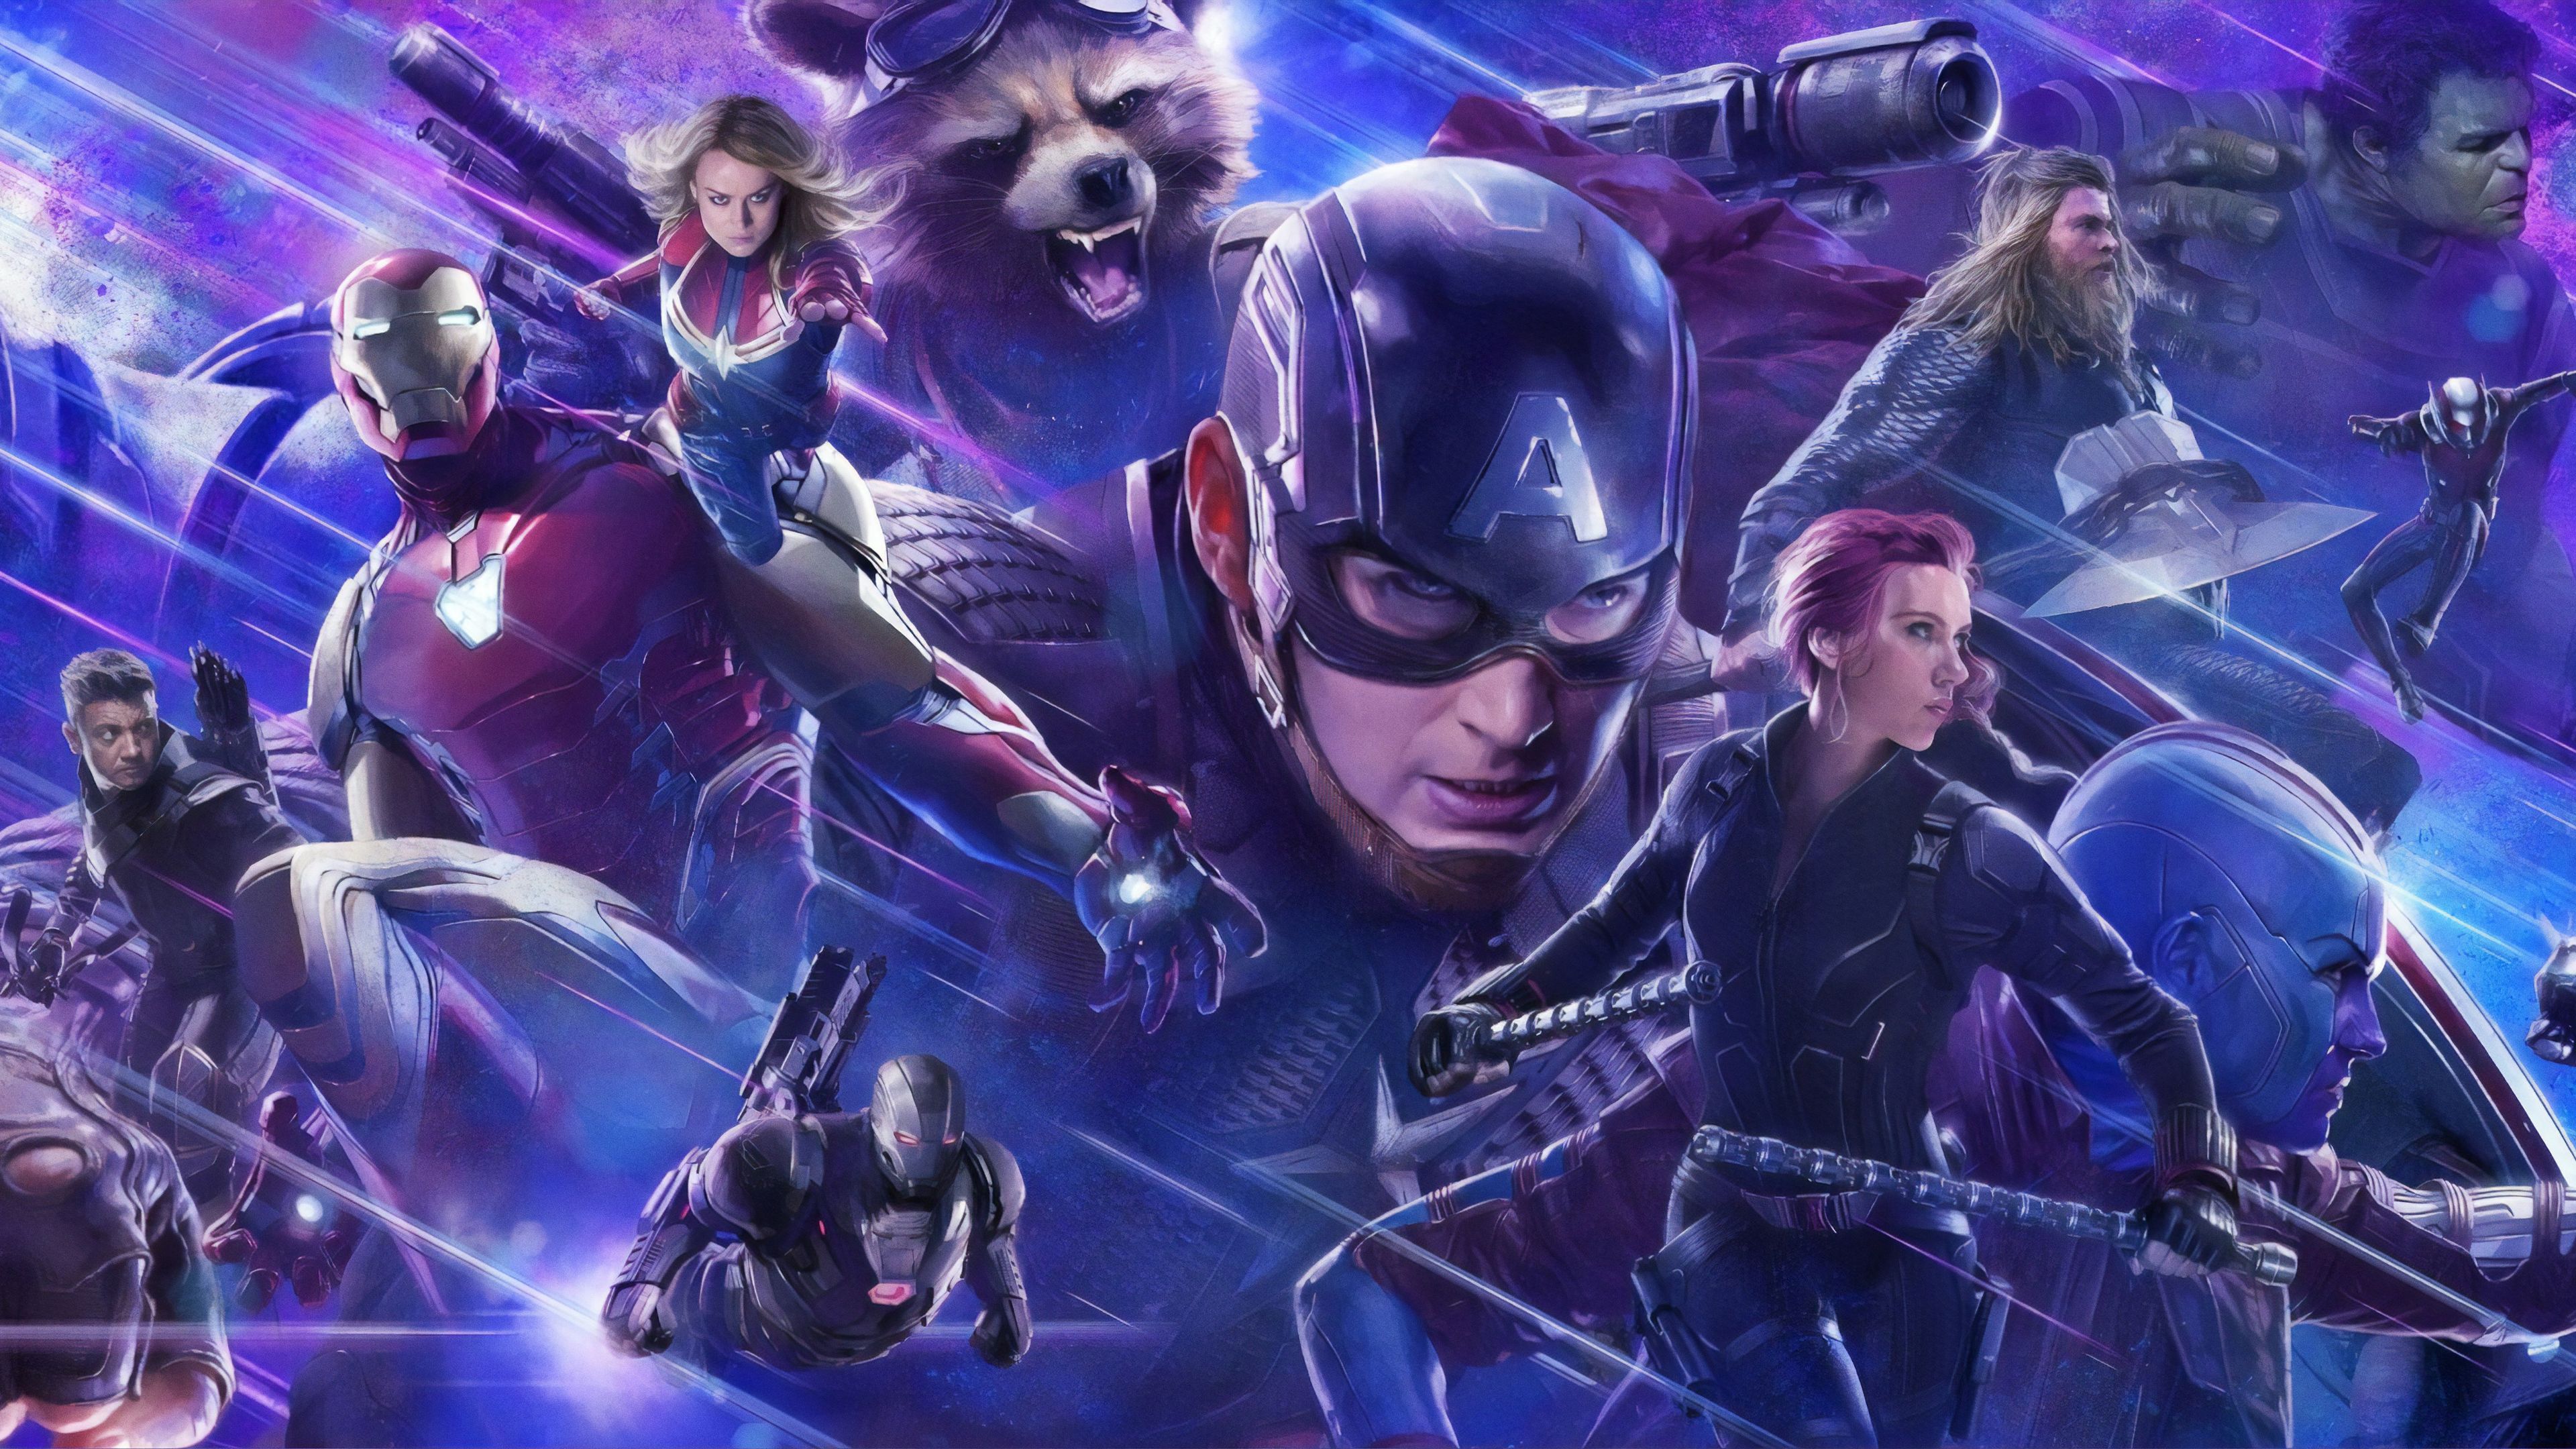 Featured image of post Endgame Laptop Avengers Endgame Wallpaper 8K Download hd wallpapers tagged with avengers from page 1 of hdwallpapers in in hd 4k resolutions